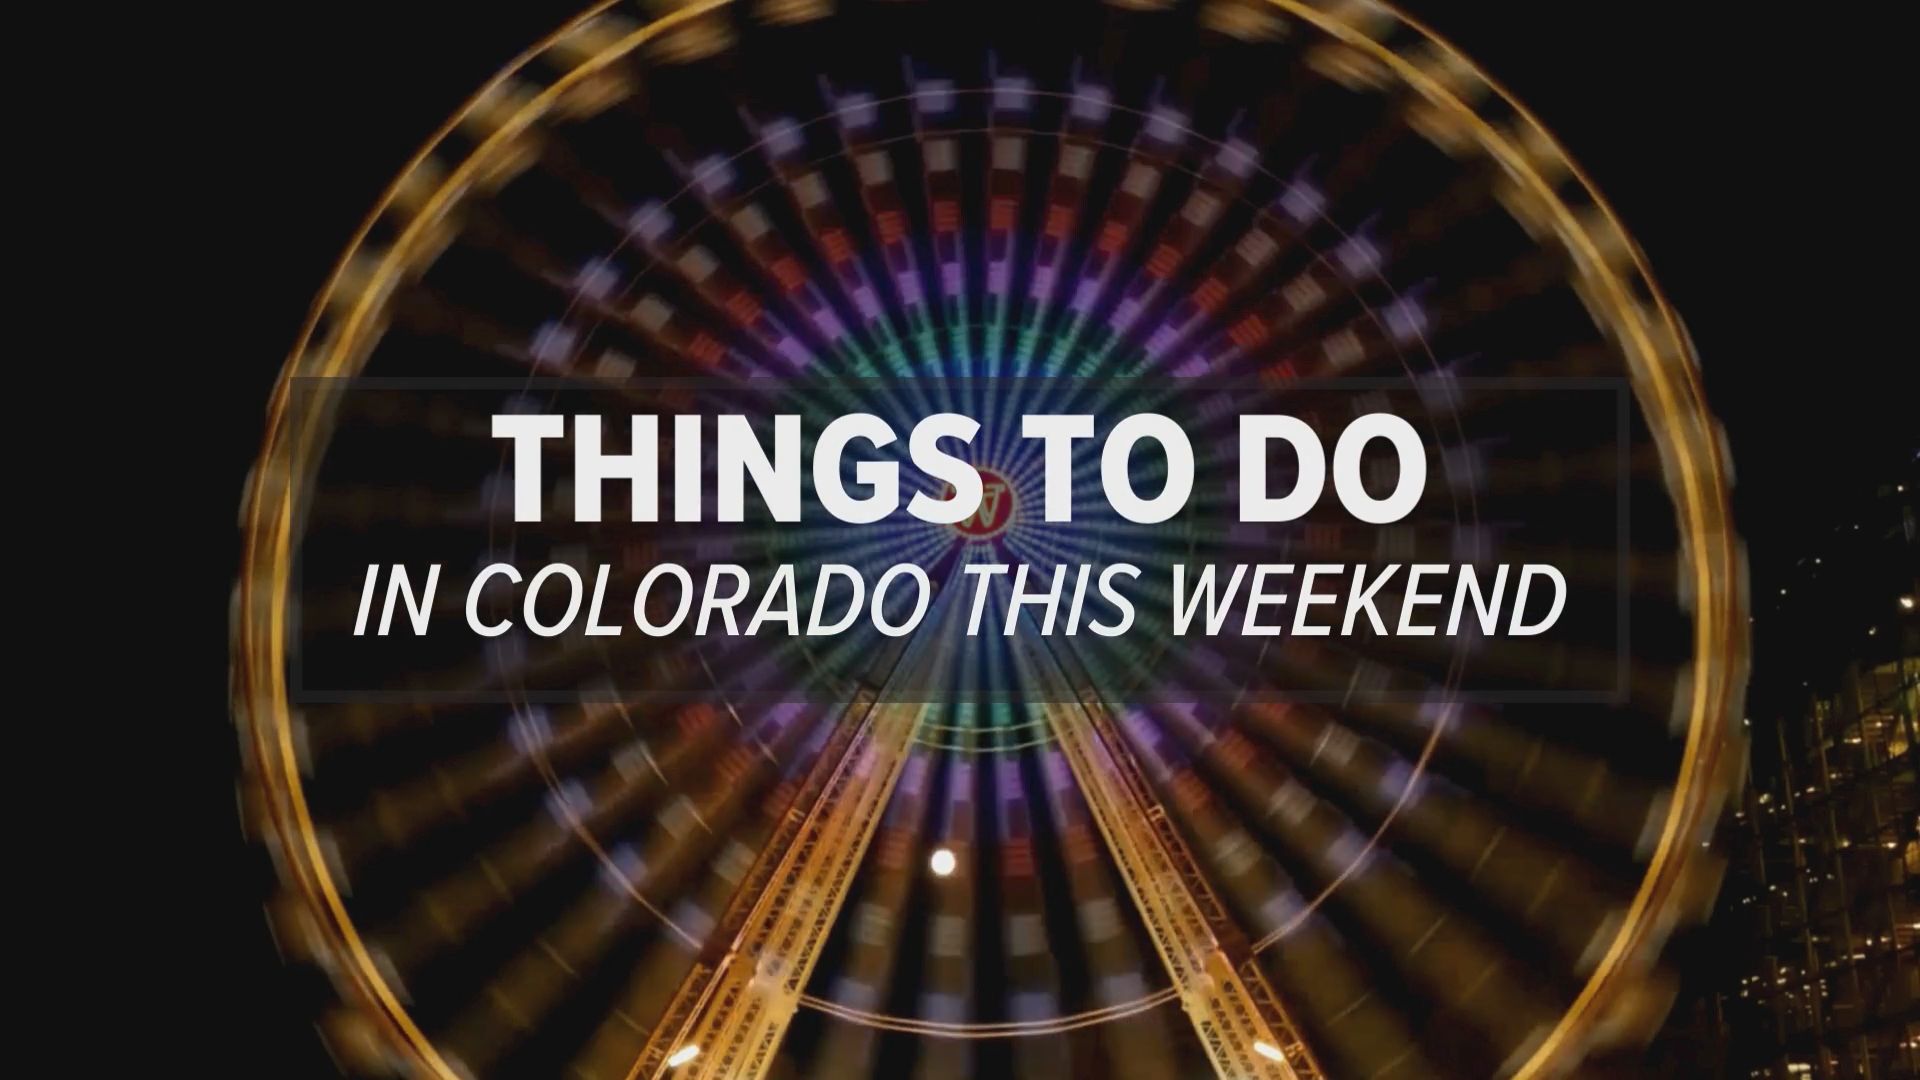 Colorado hosts county fairs, rodeos, tiny house and art festivals, Billy Joel and the UFC this July weekend.